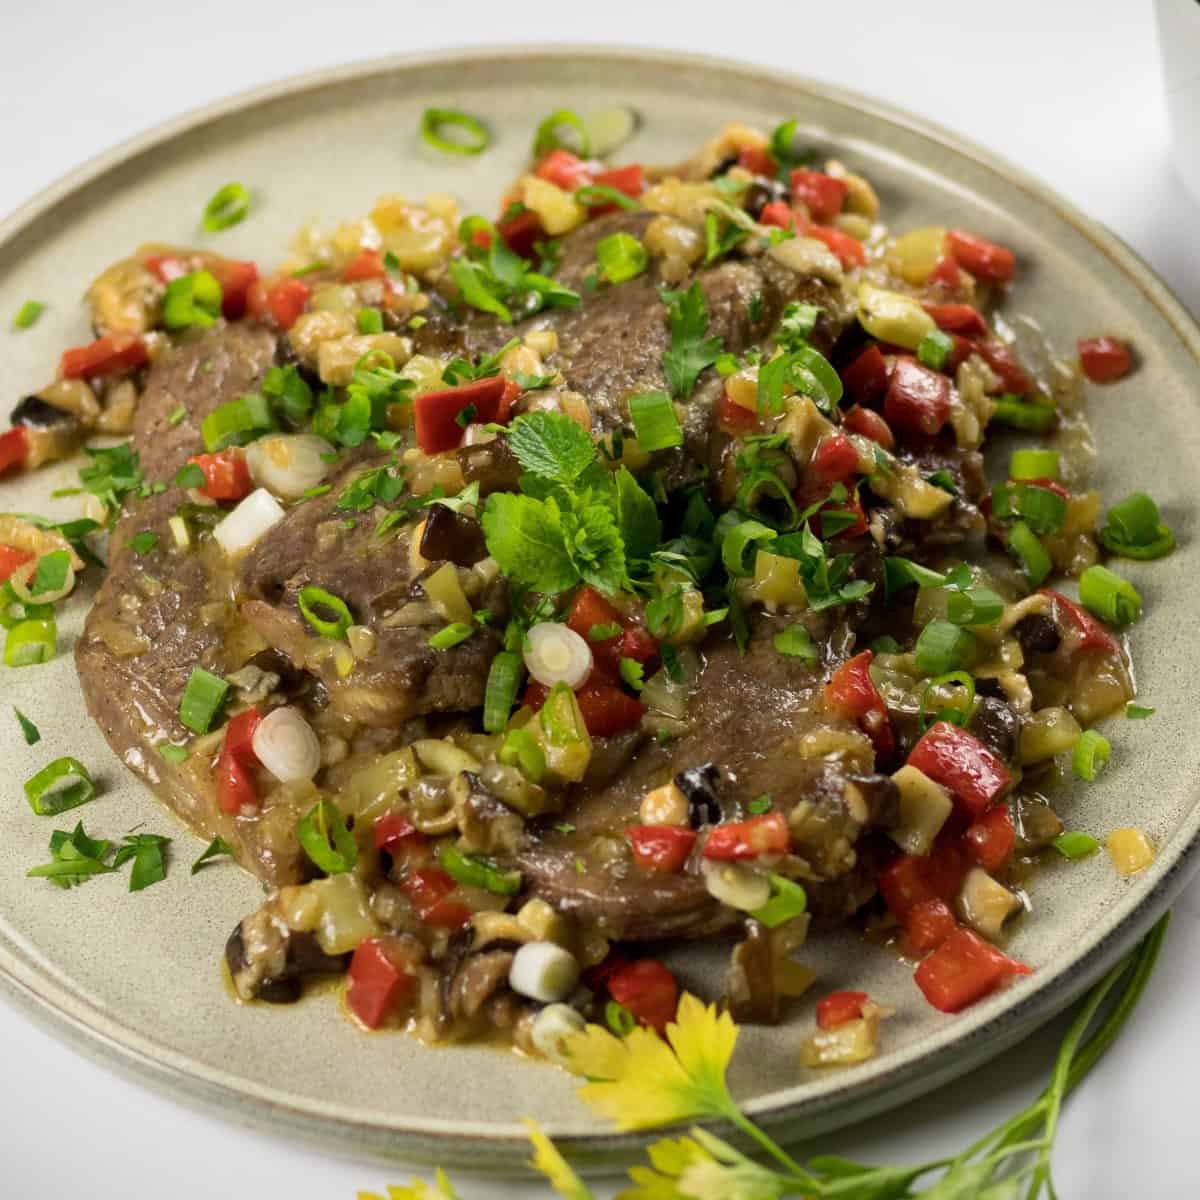 Keto Pepper Steak Recipe garnished with chopped green onions and served on a plate.